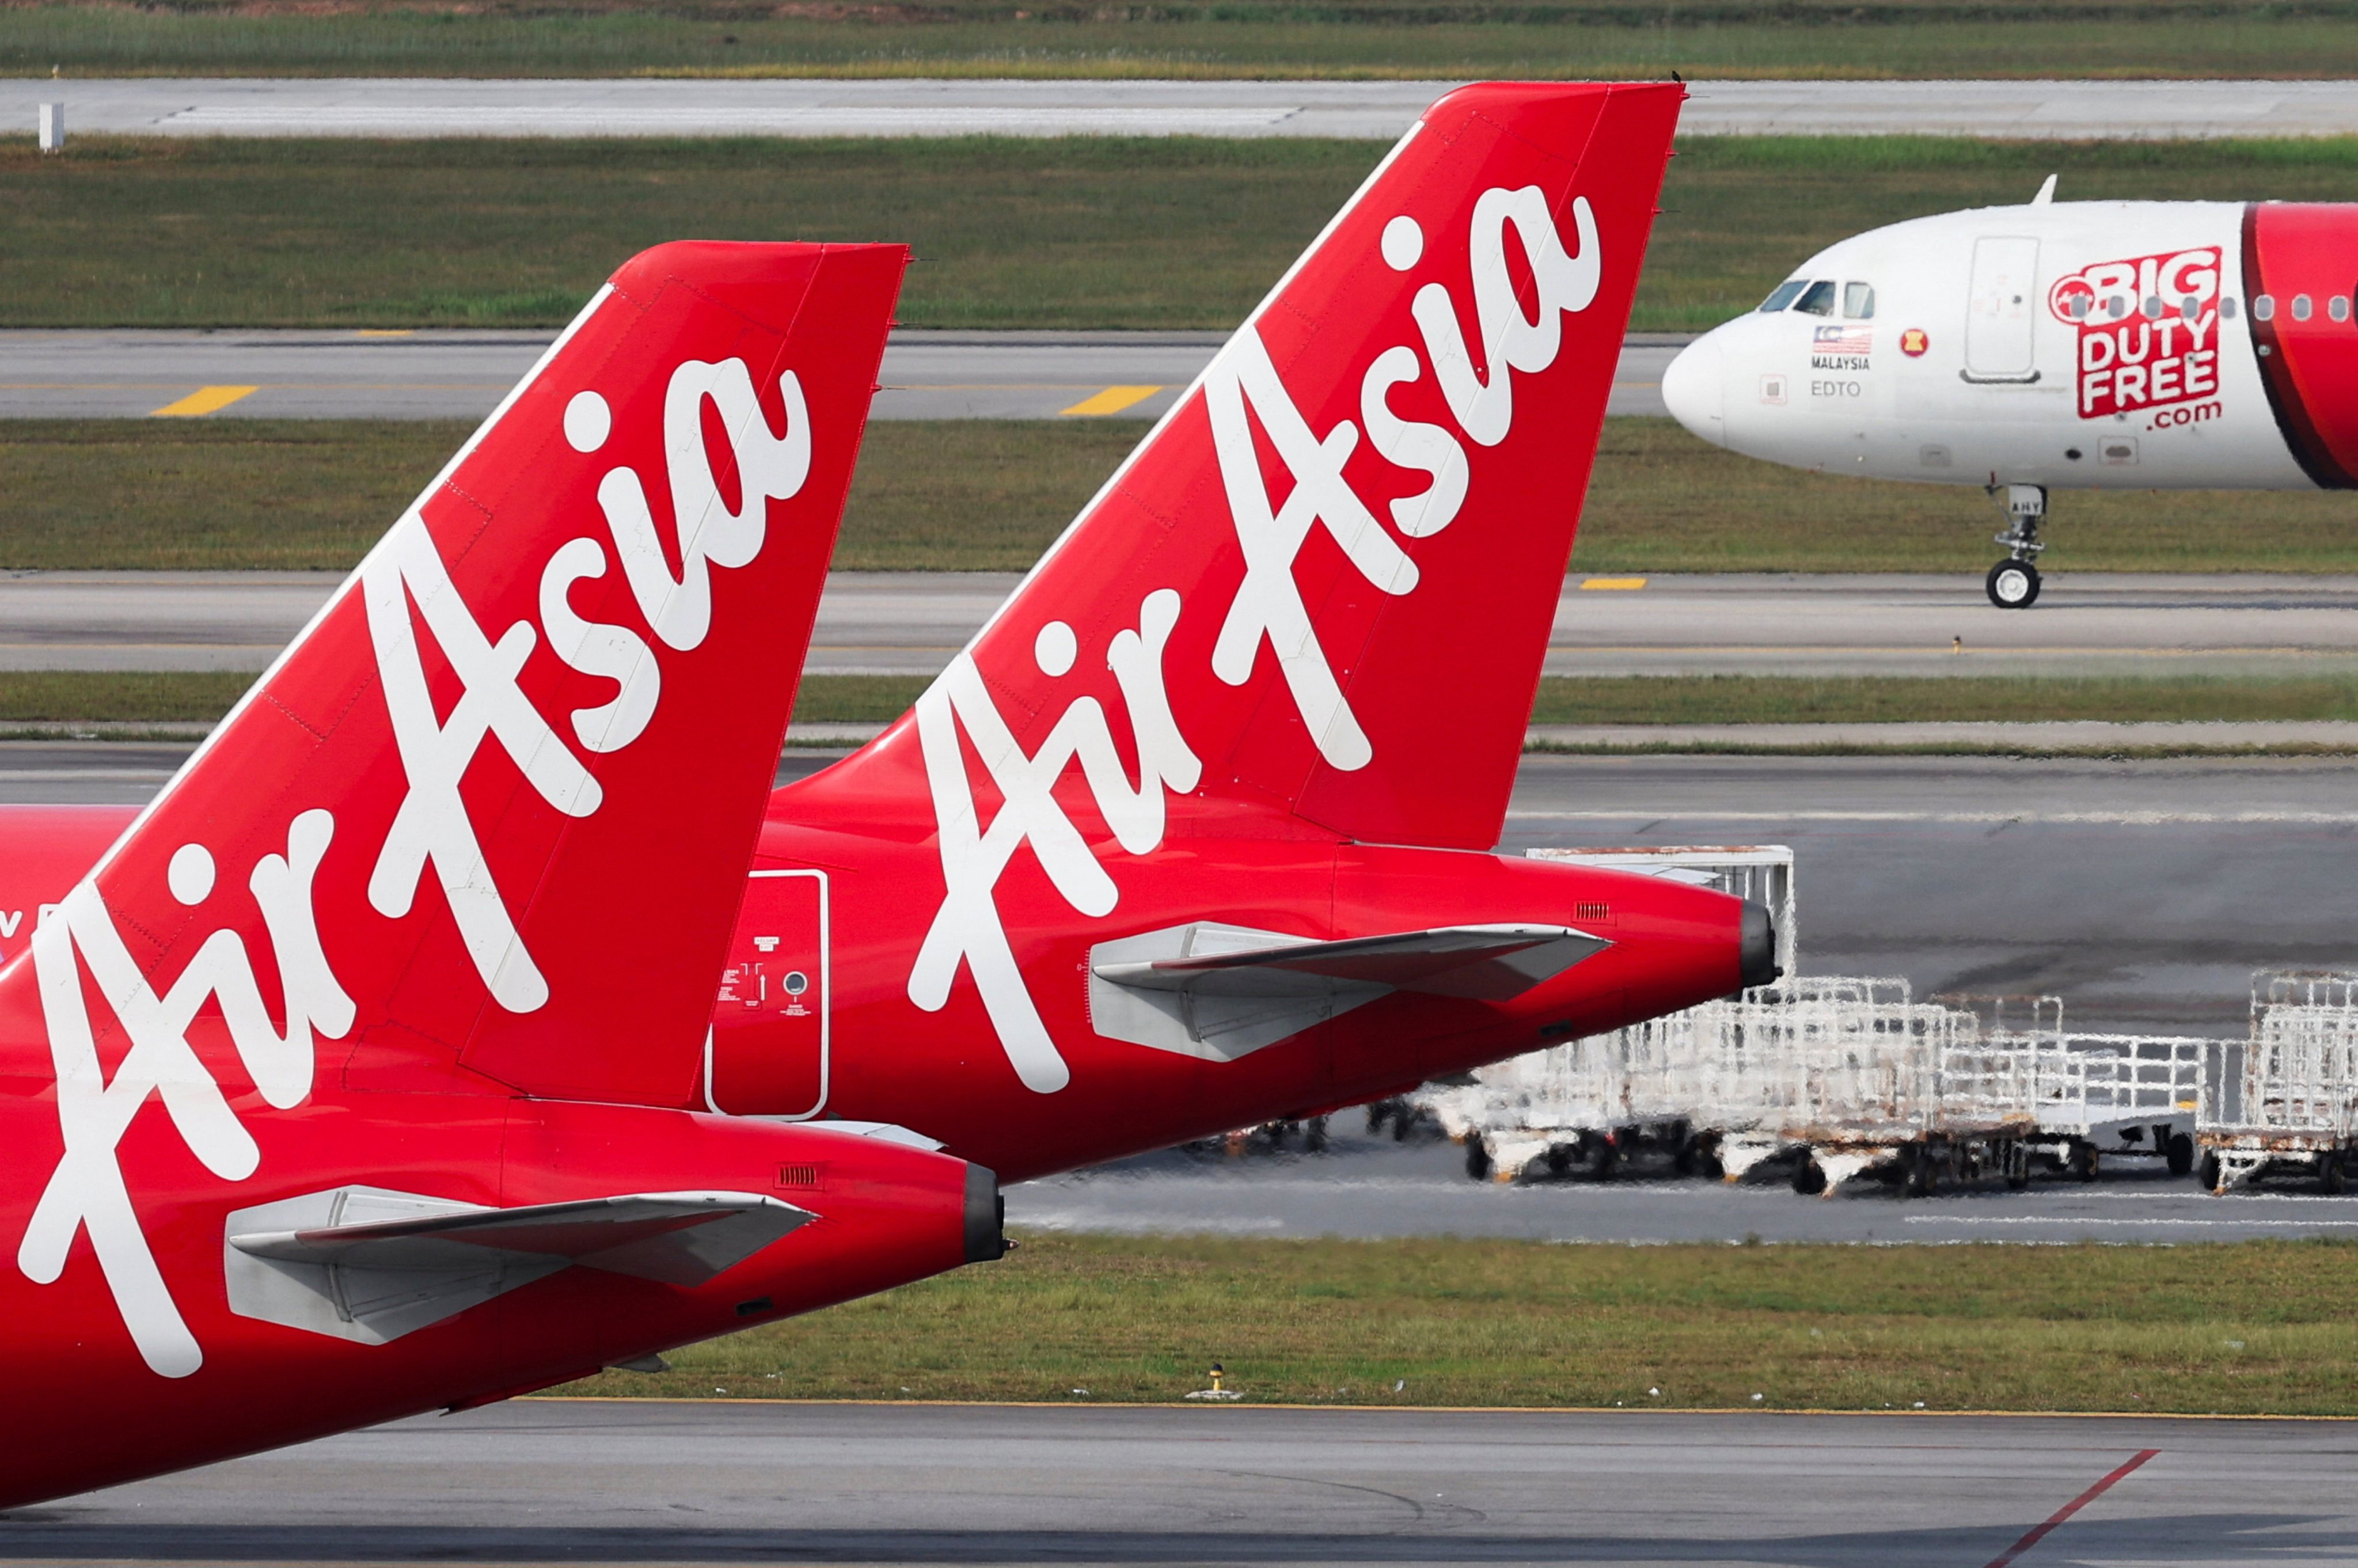 AirAsia planes are seen on the tarmac at Kuala Lumpur International Airport on Monday. The airline’s founder said he expects 2024 to be ‘very good’ for his companies and 2025 to be ‘amazing’. Photo: Reuters